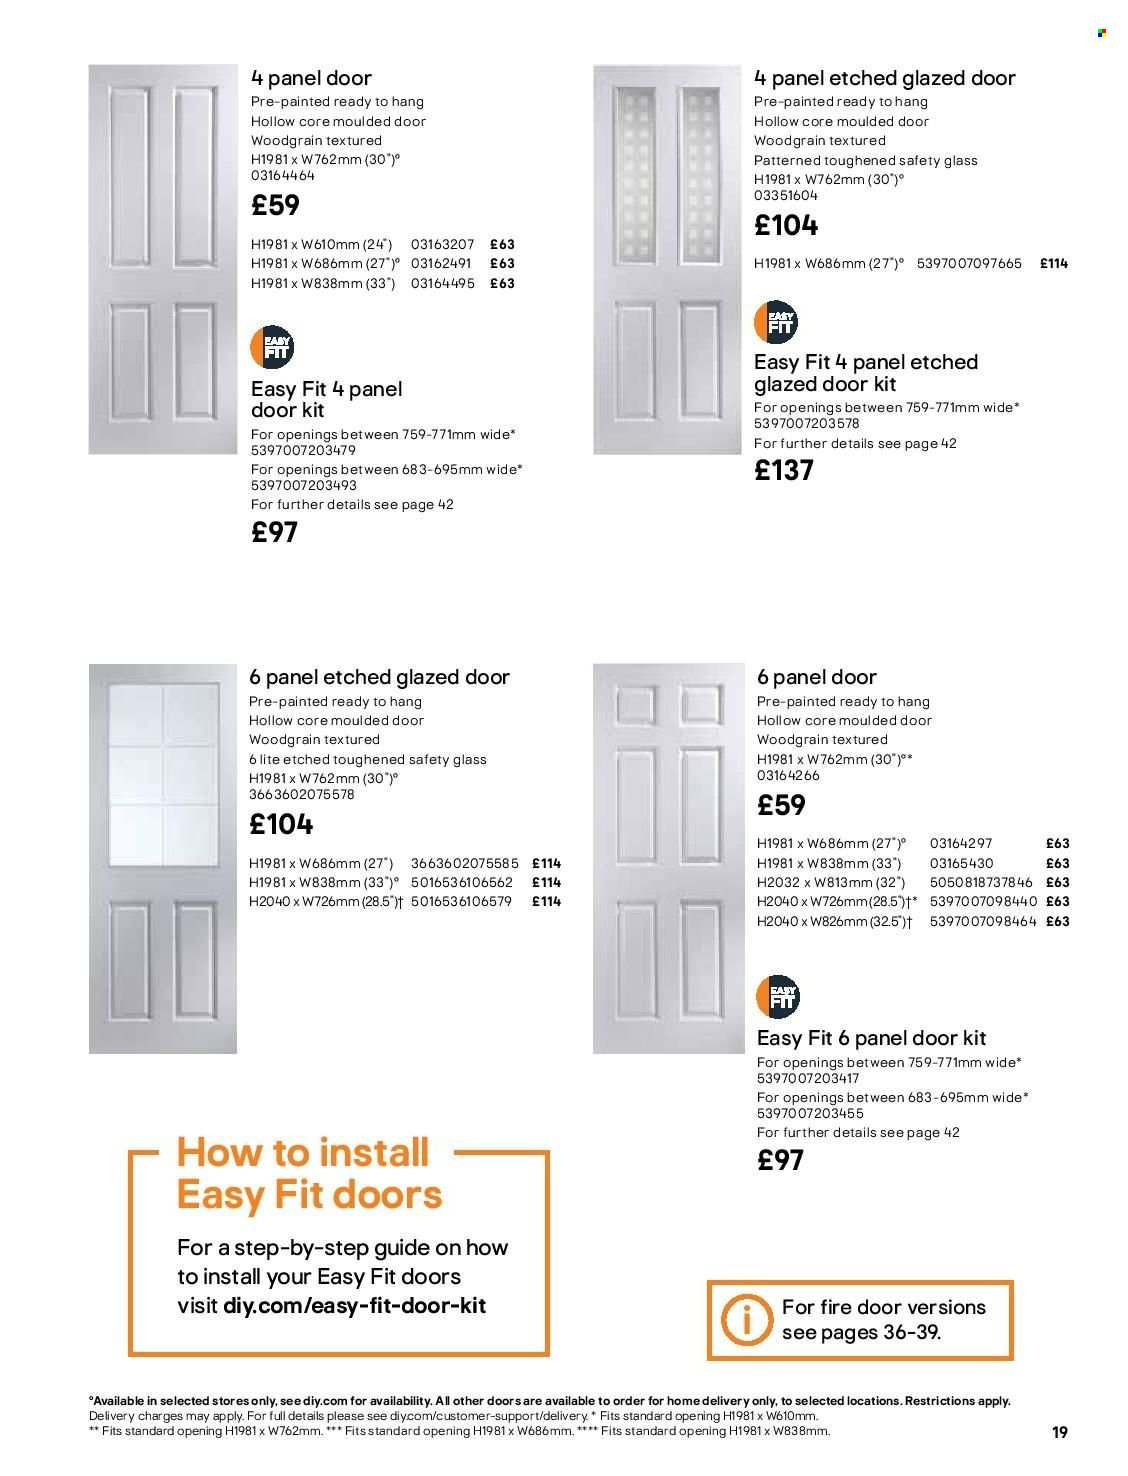 B&Q offer . Page 19.